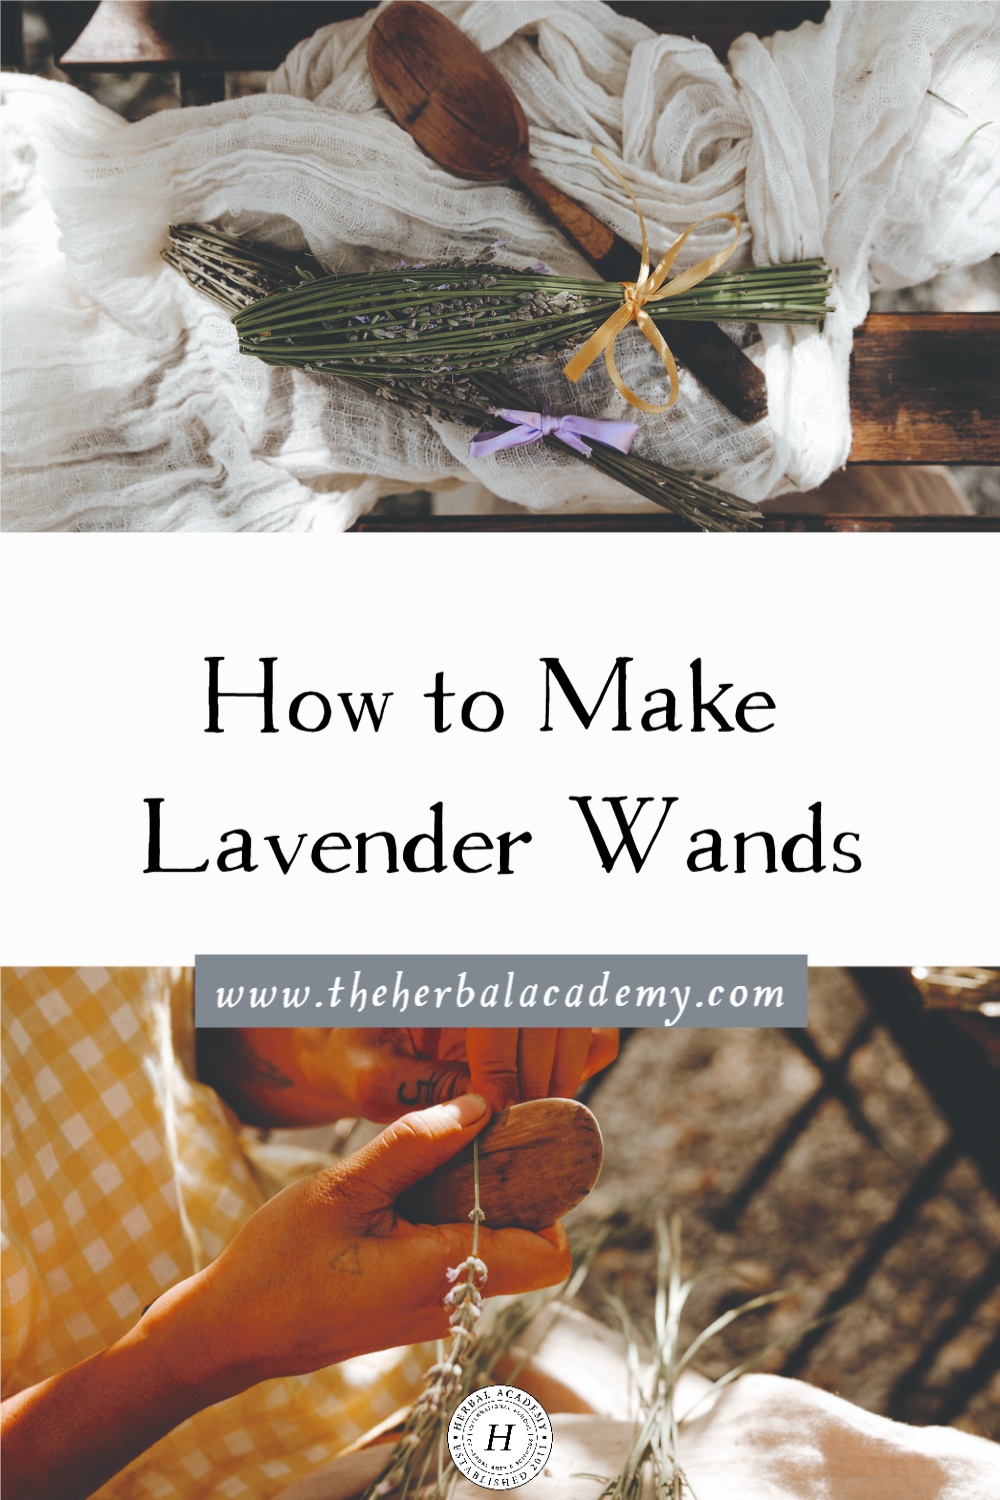 How to Make Lavender Wands | Herbal Academy | In this book excerpt written by Cat Seixas, you will learn two easy ways to make lavender wands to capture the sweet fragrance of lavender.